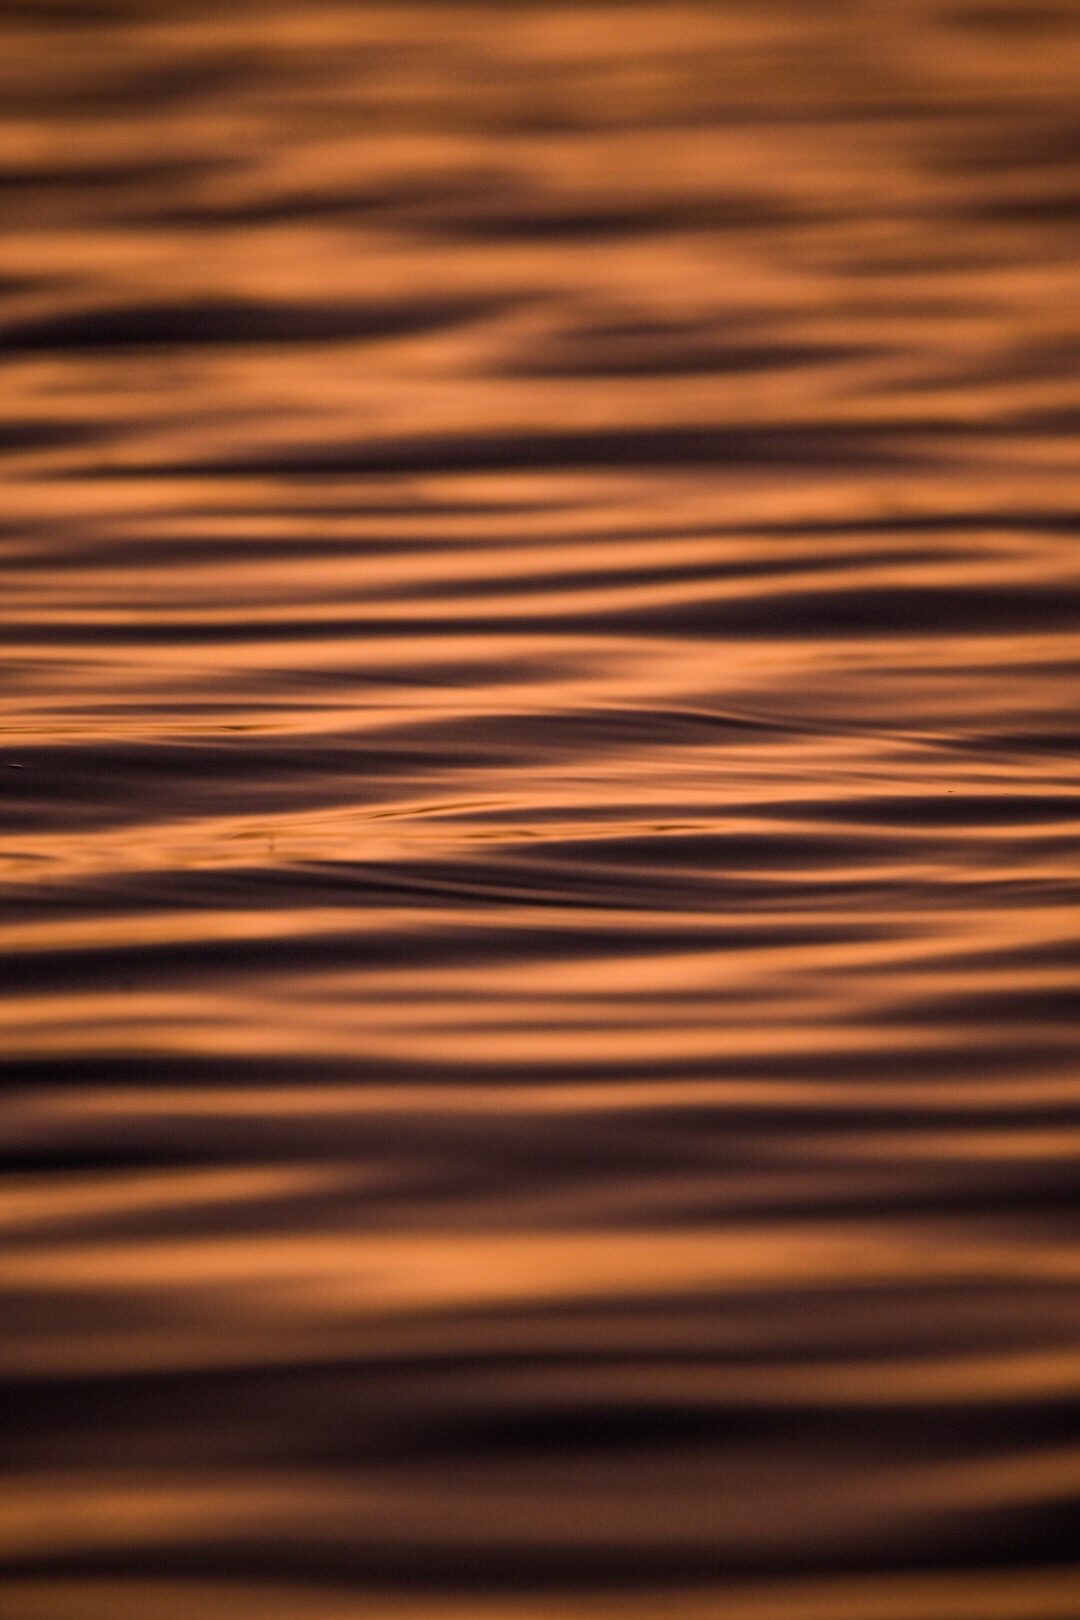 Ripples on the water before sunrise